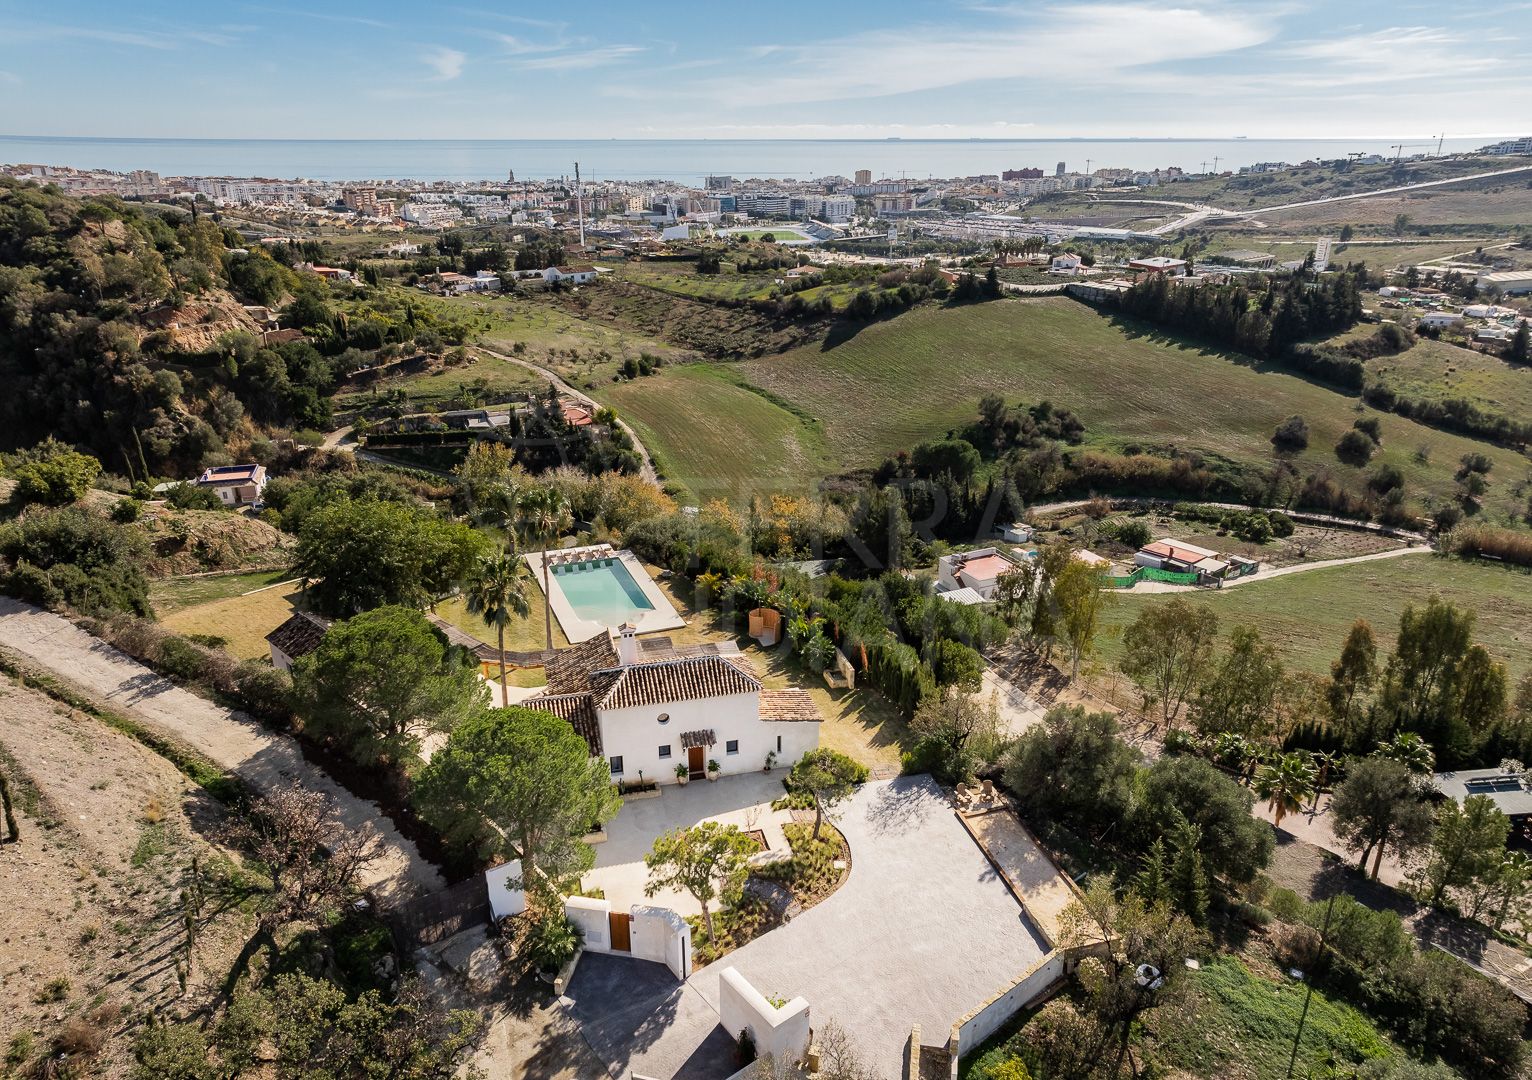 Introducing a Magnificent Luxury Villa with Unrivalled Views in Estepona